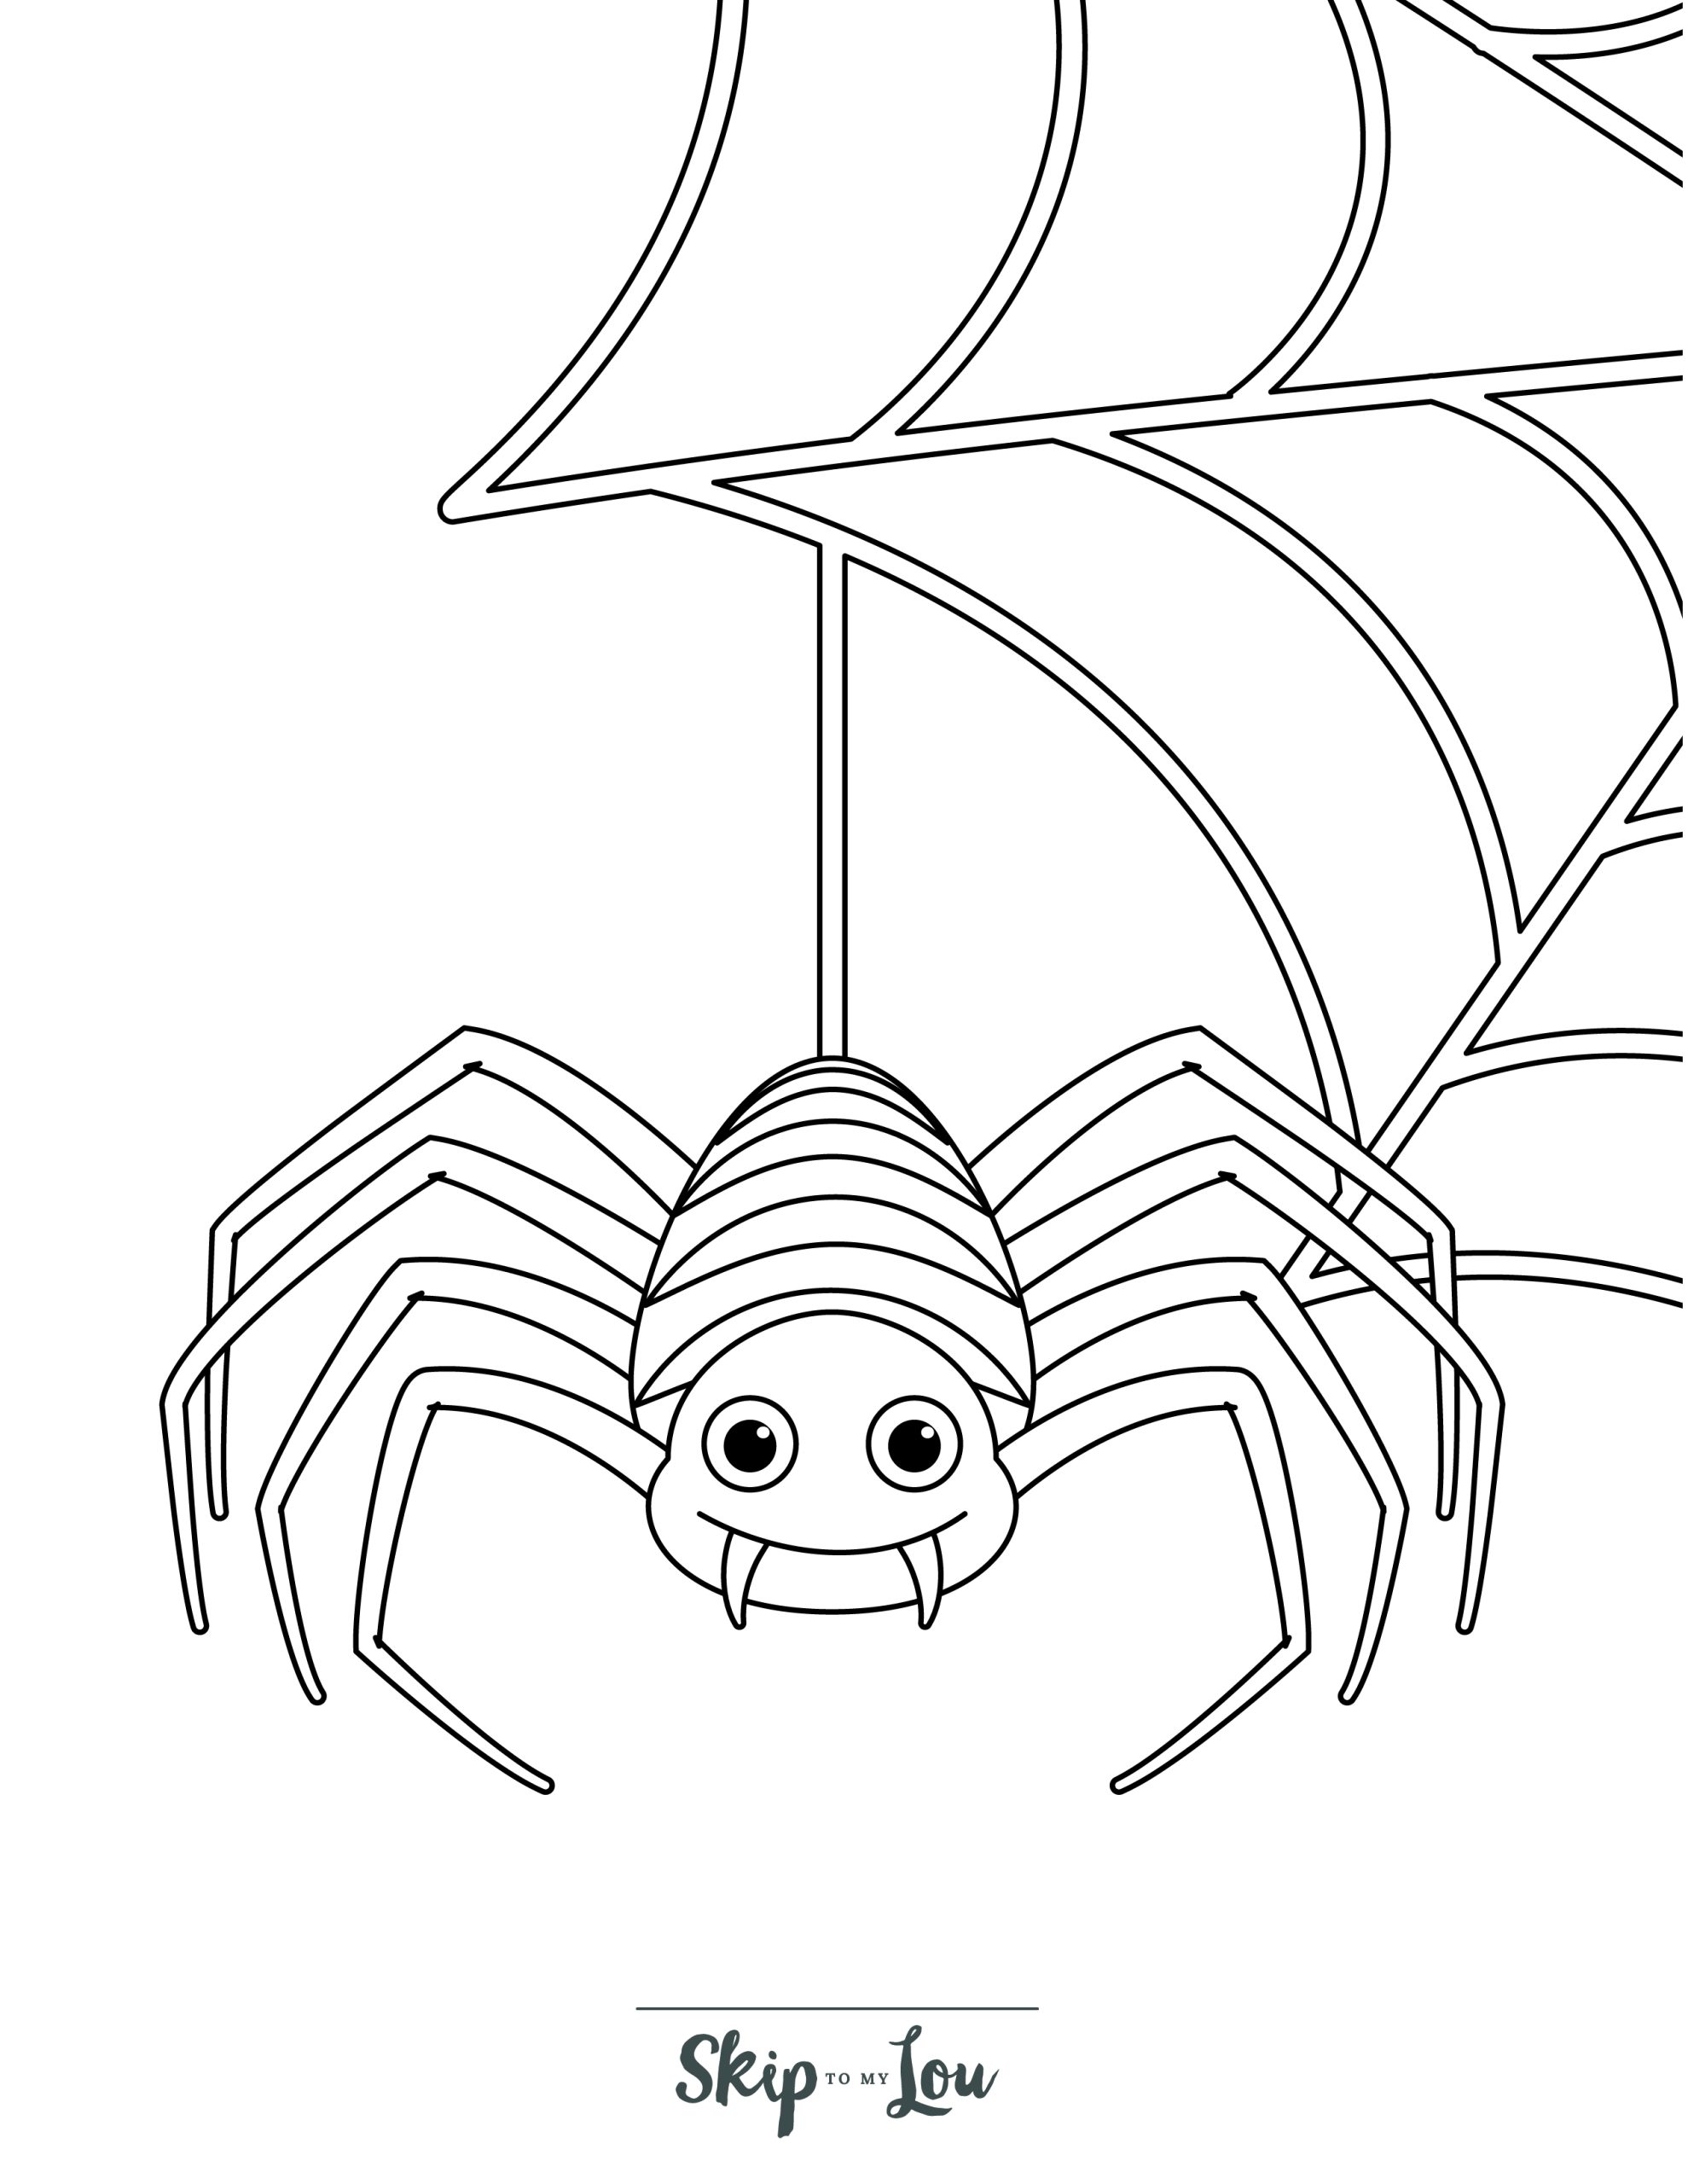 Spider coloring pages free printable pdf sheets skip to my lou